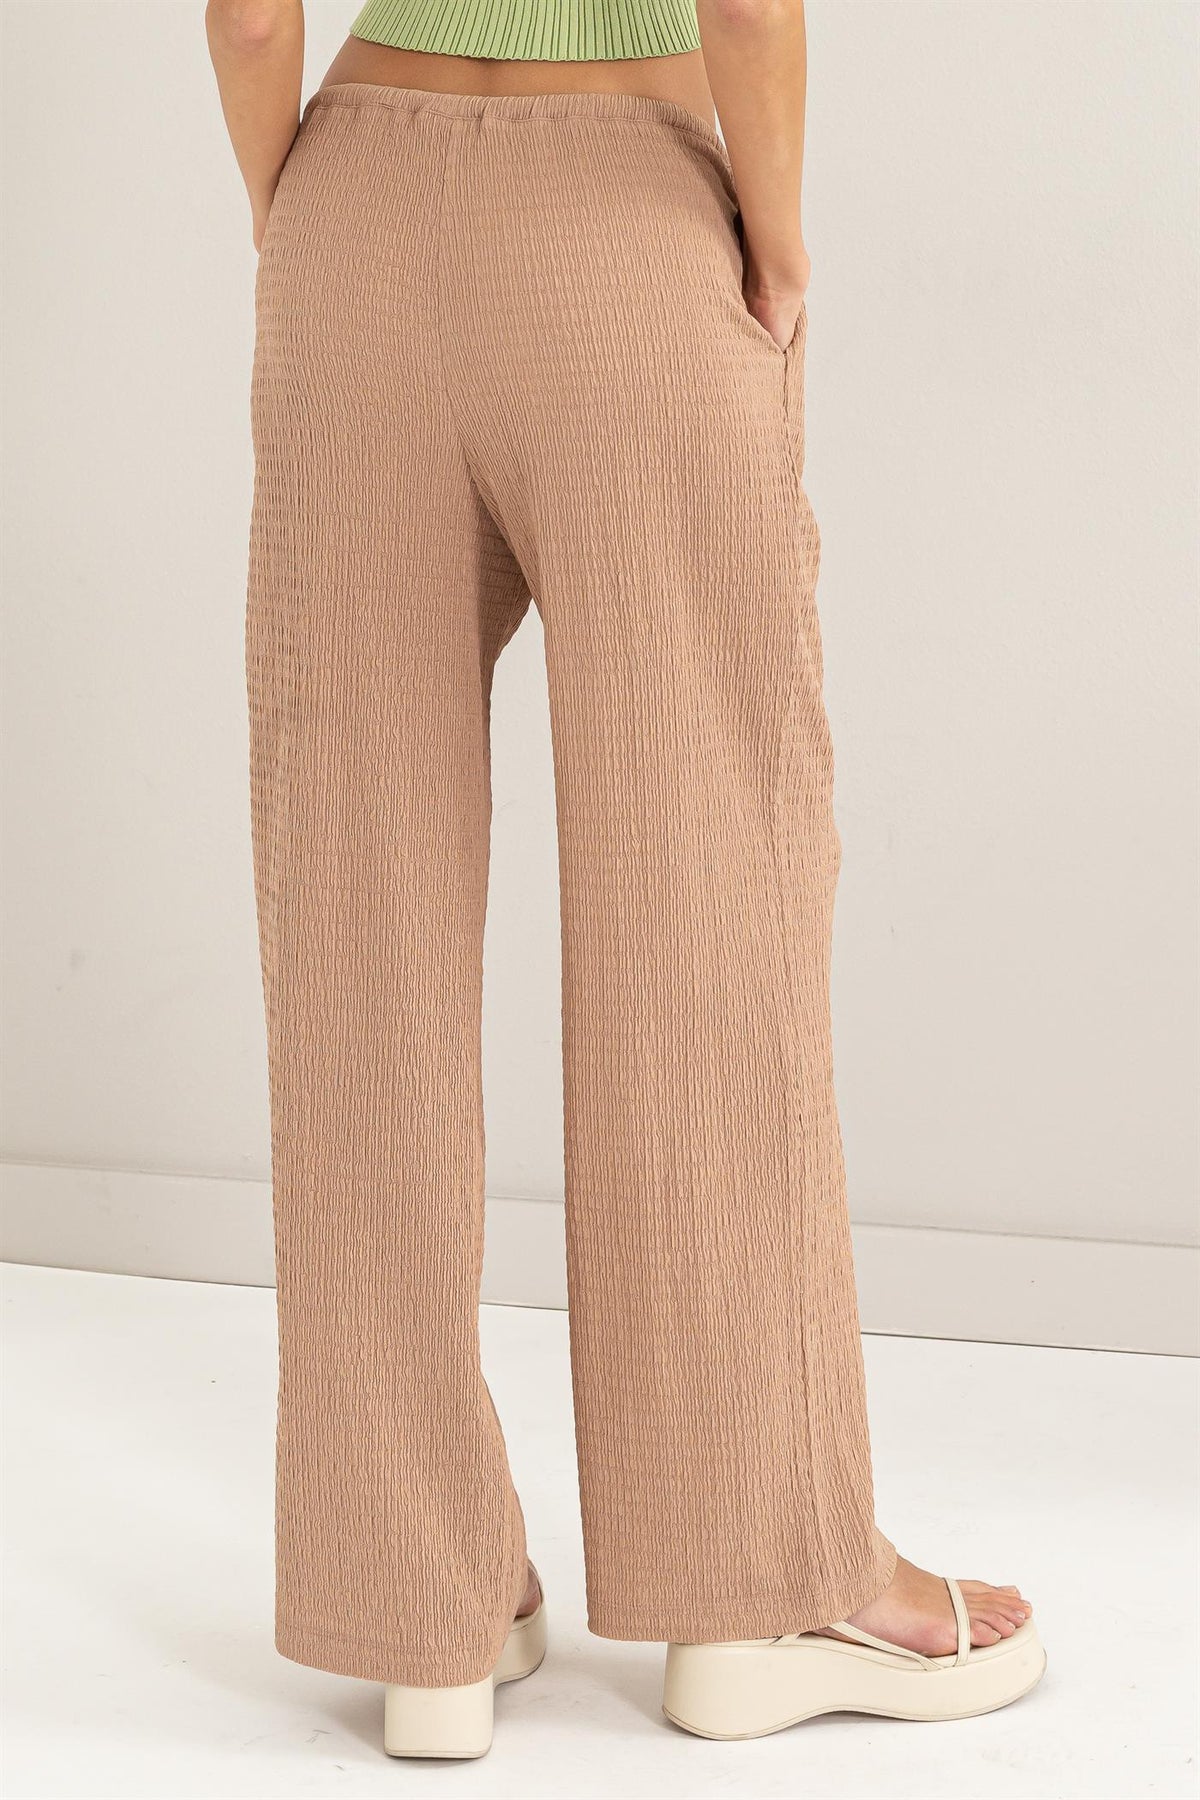 Go Getter Textured Pant, Tan